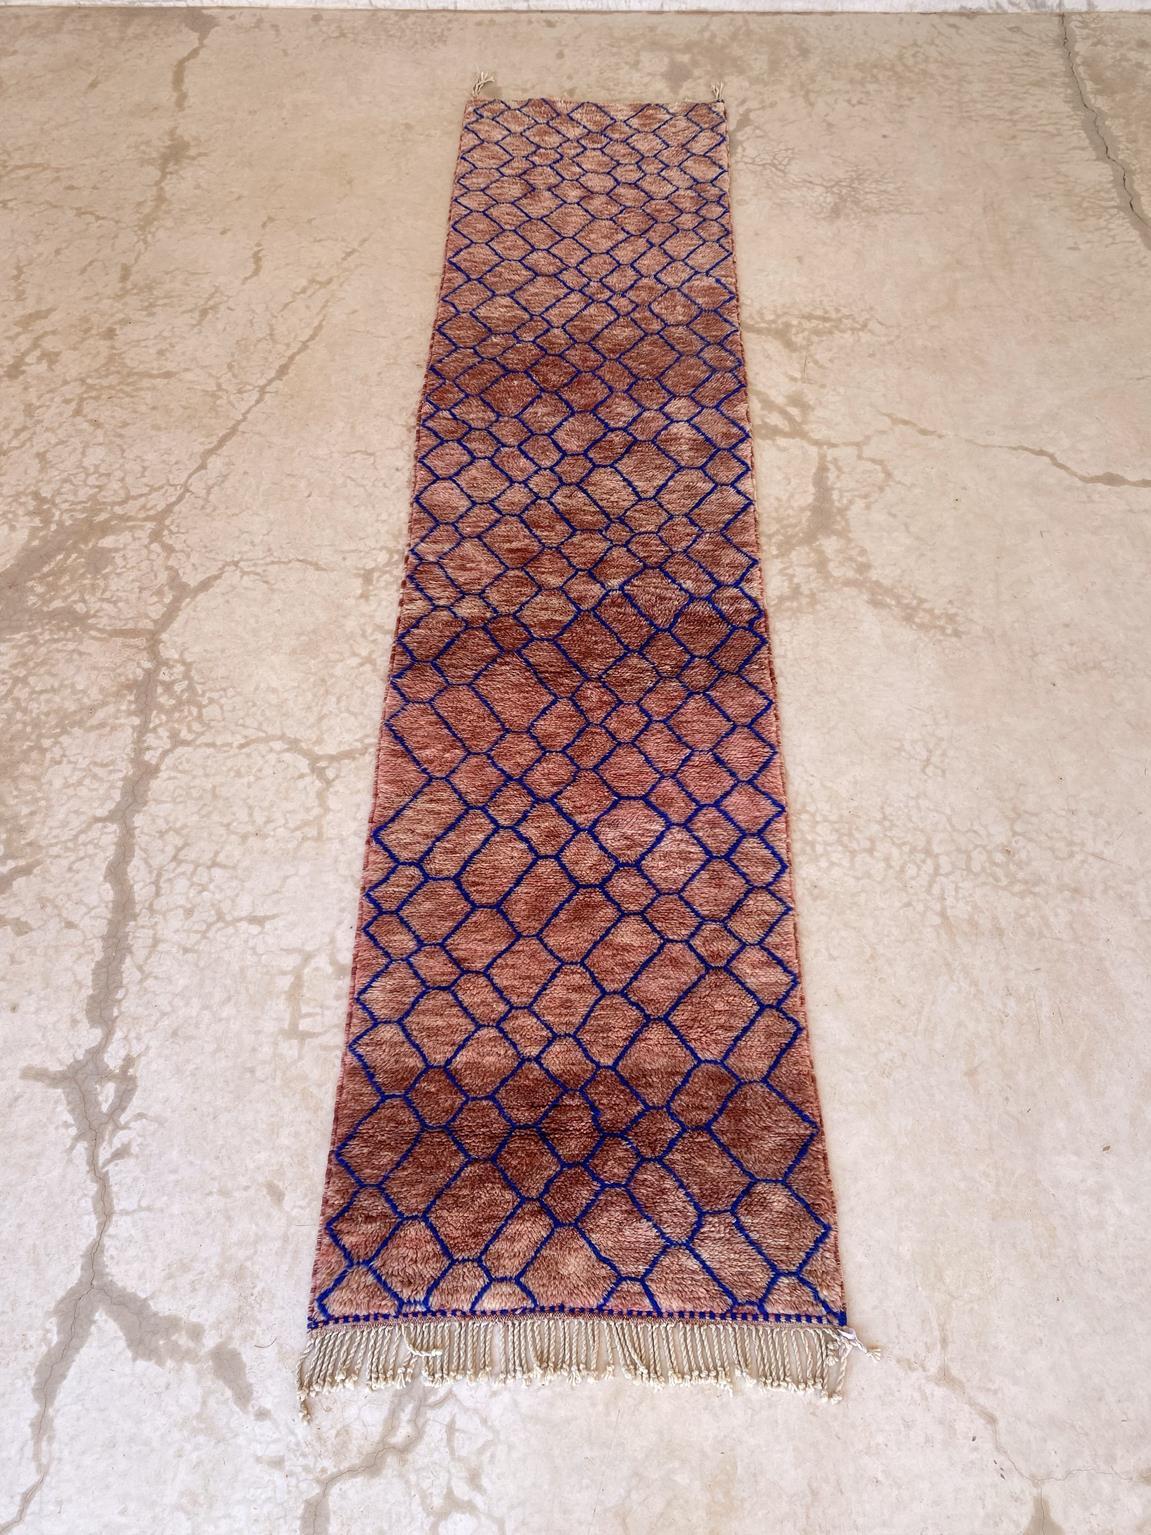 This modern-style, original Beni Mrirt runner rug was all handmade in the area of Khenifra, Atlas Mountains, Morocco. Groups of women there still weave by hand on traditional, vertical looms to make these new rugs!

This long rug is made of premium